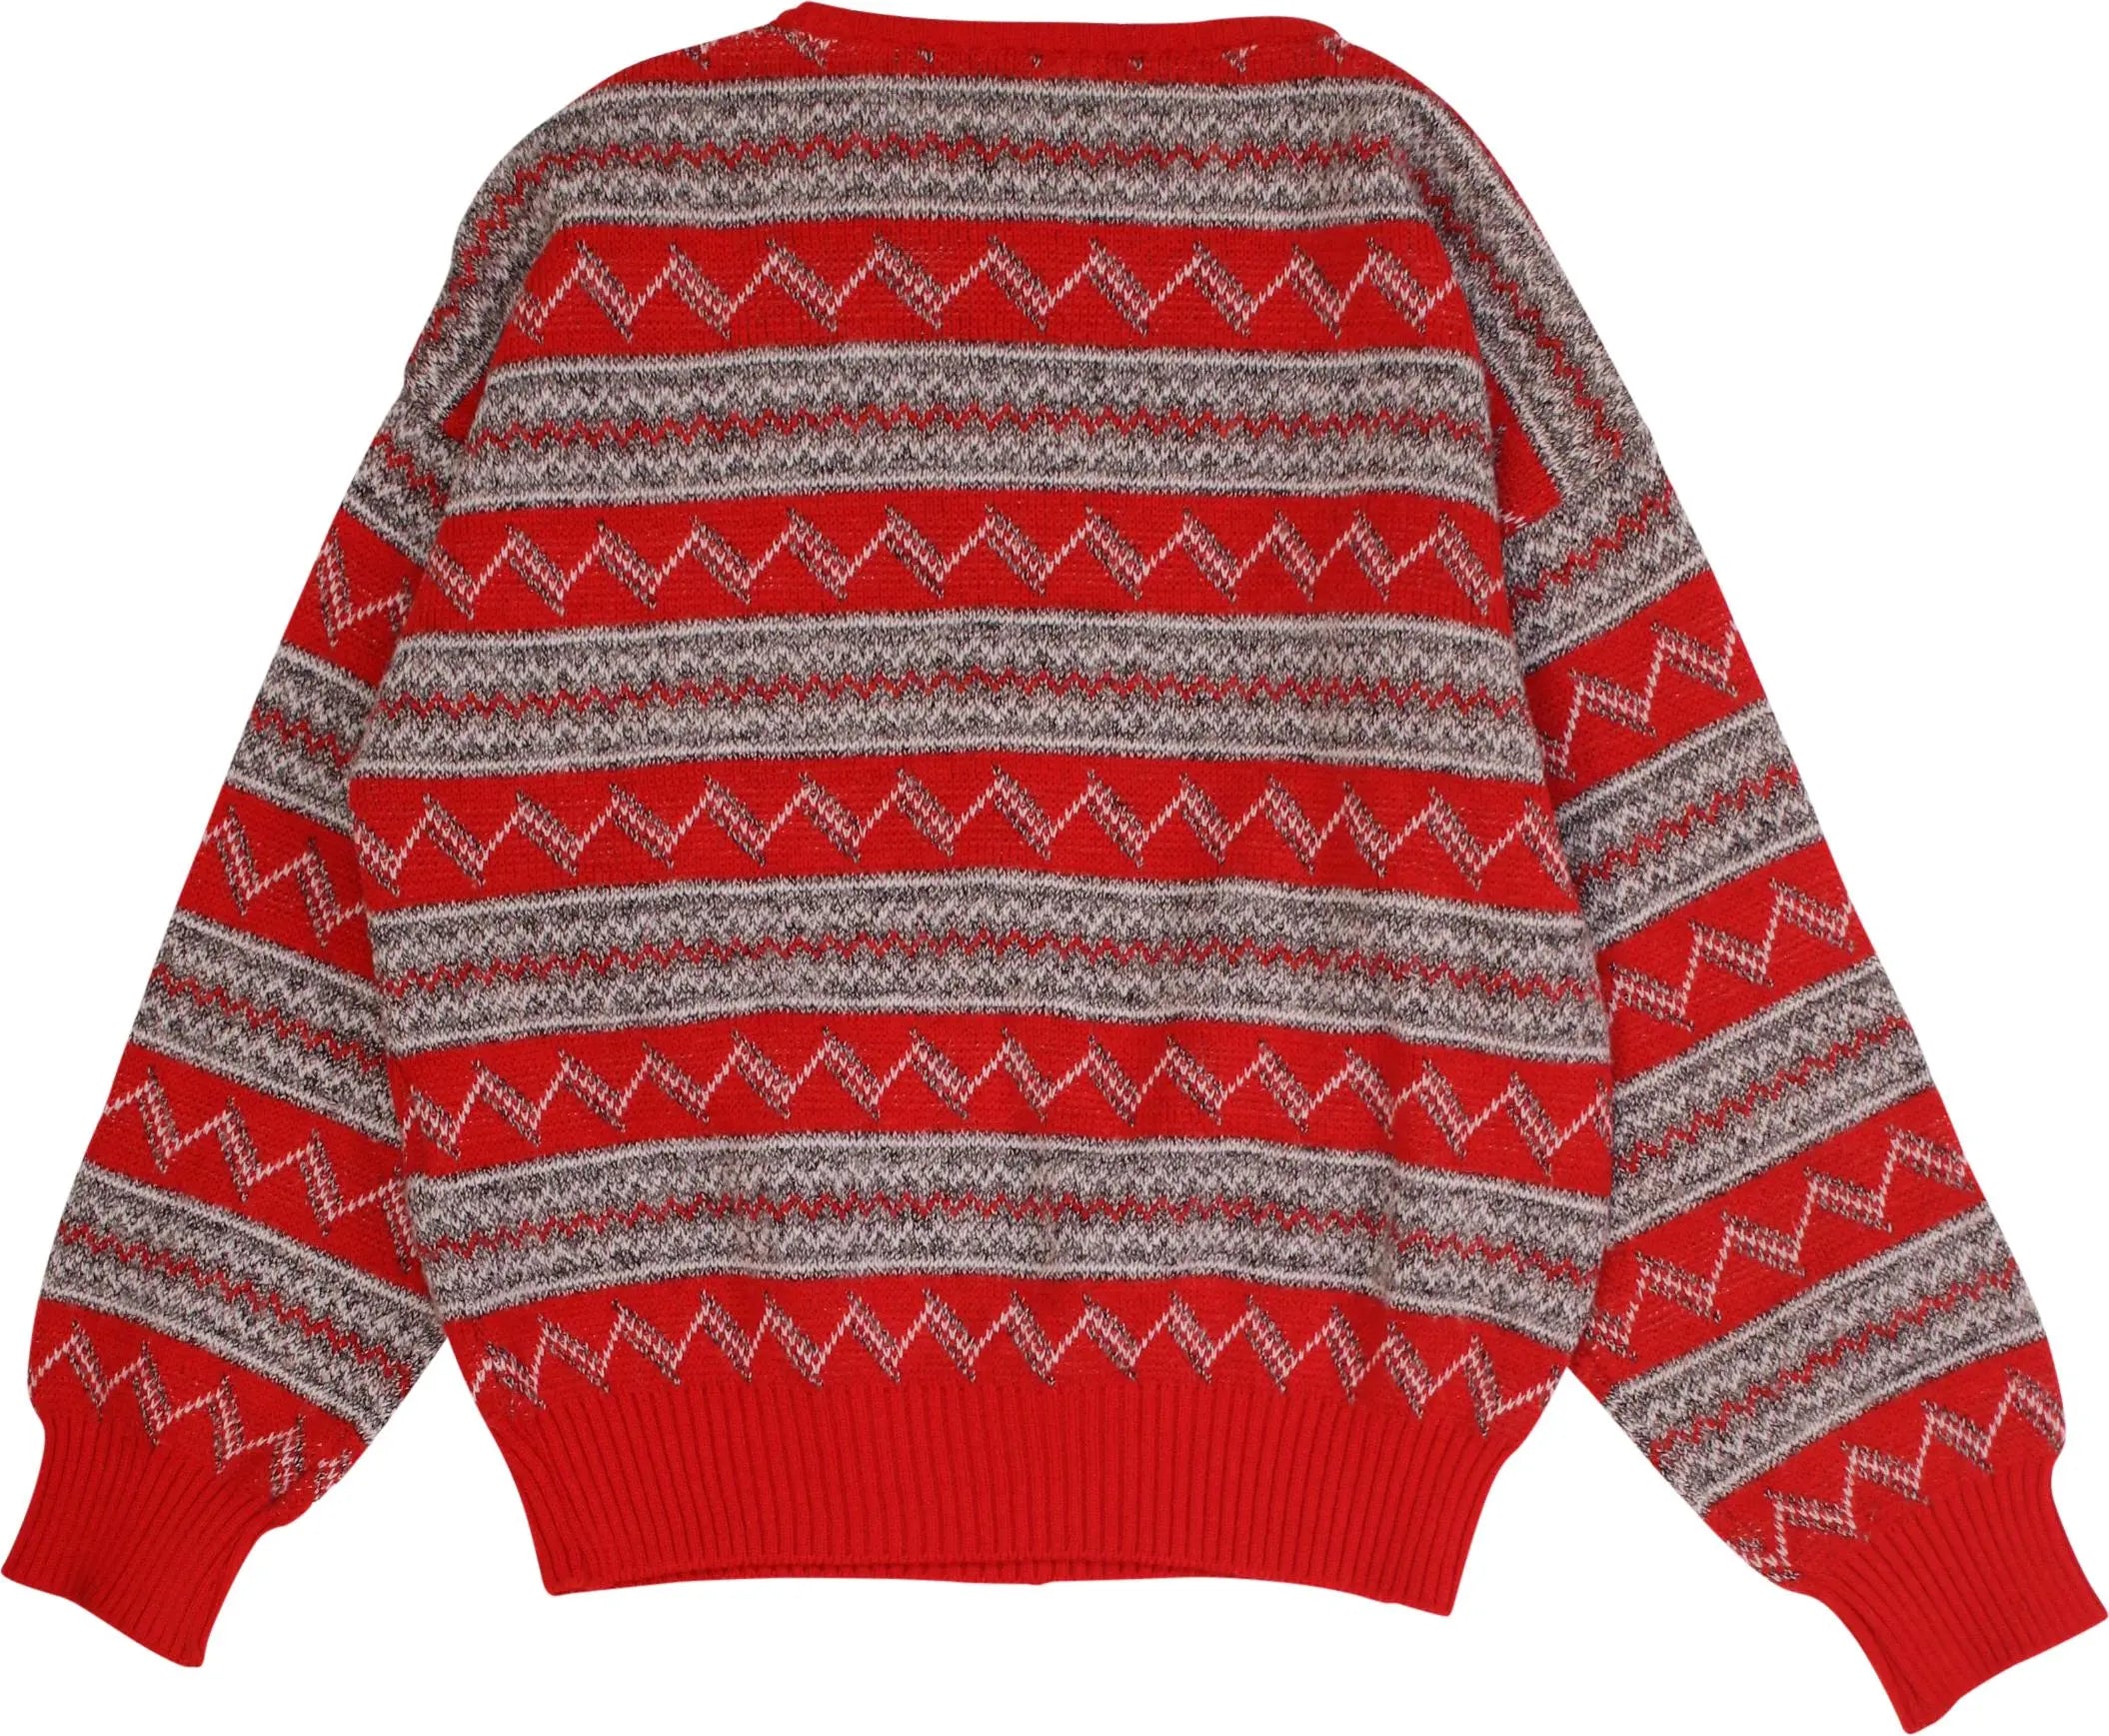 Maglifigio Pancari - Knitted Jumper- ThriftTale.com - Vintage and second handclothing